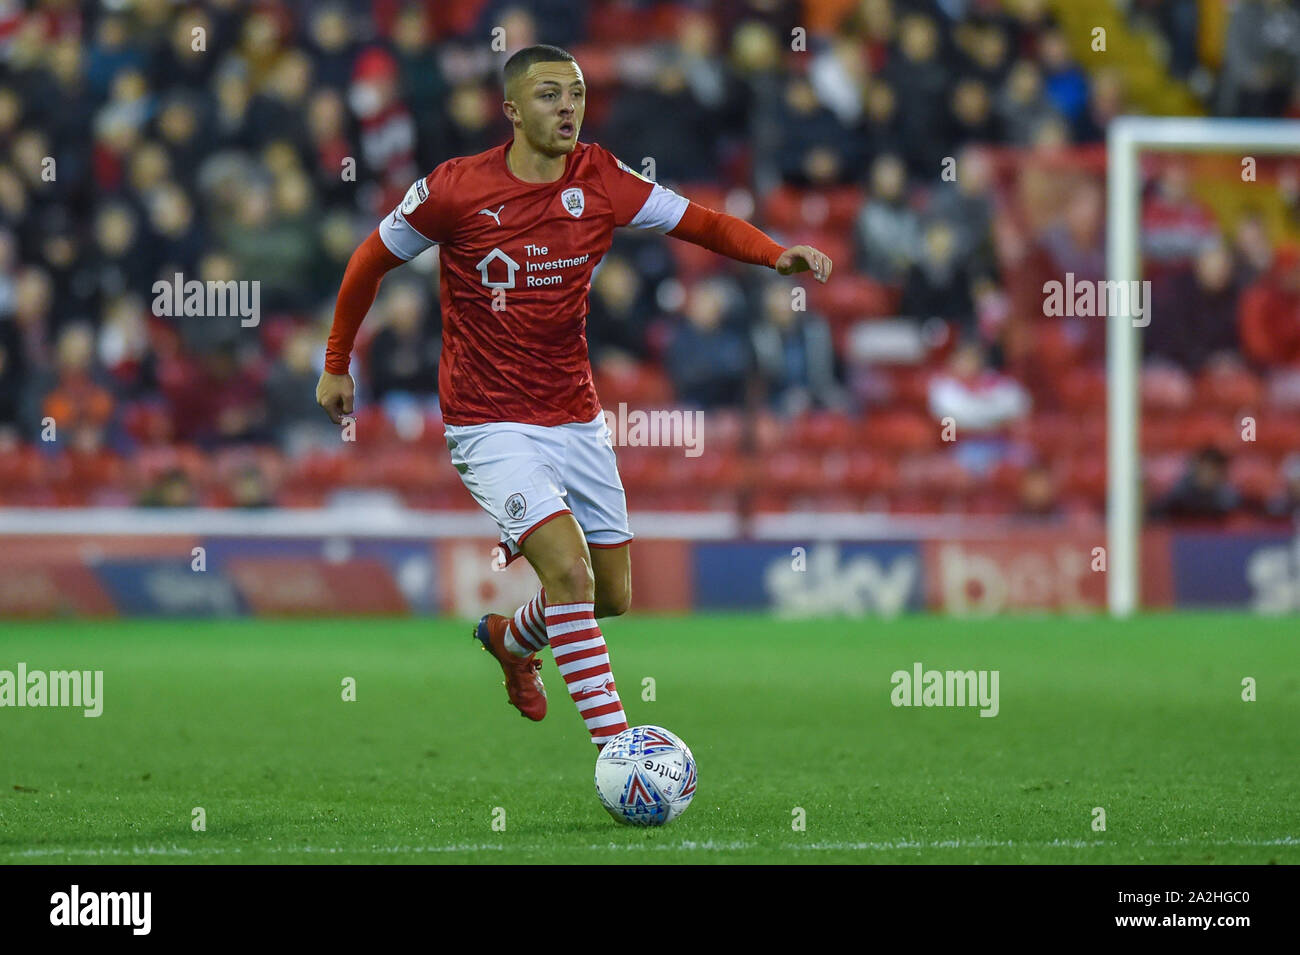 2nd October 2019, Oakwell, Barnsley, England; Sky Bet Championship, Barnsley v Derby County :Jordan Williams (2) of Barnsley FC with the ball. Credit: Dean Williams/News Images Stock Photo